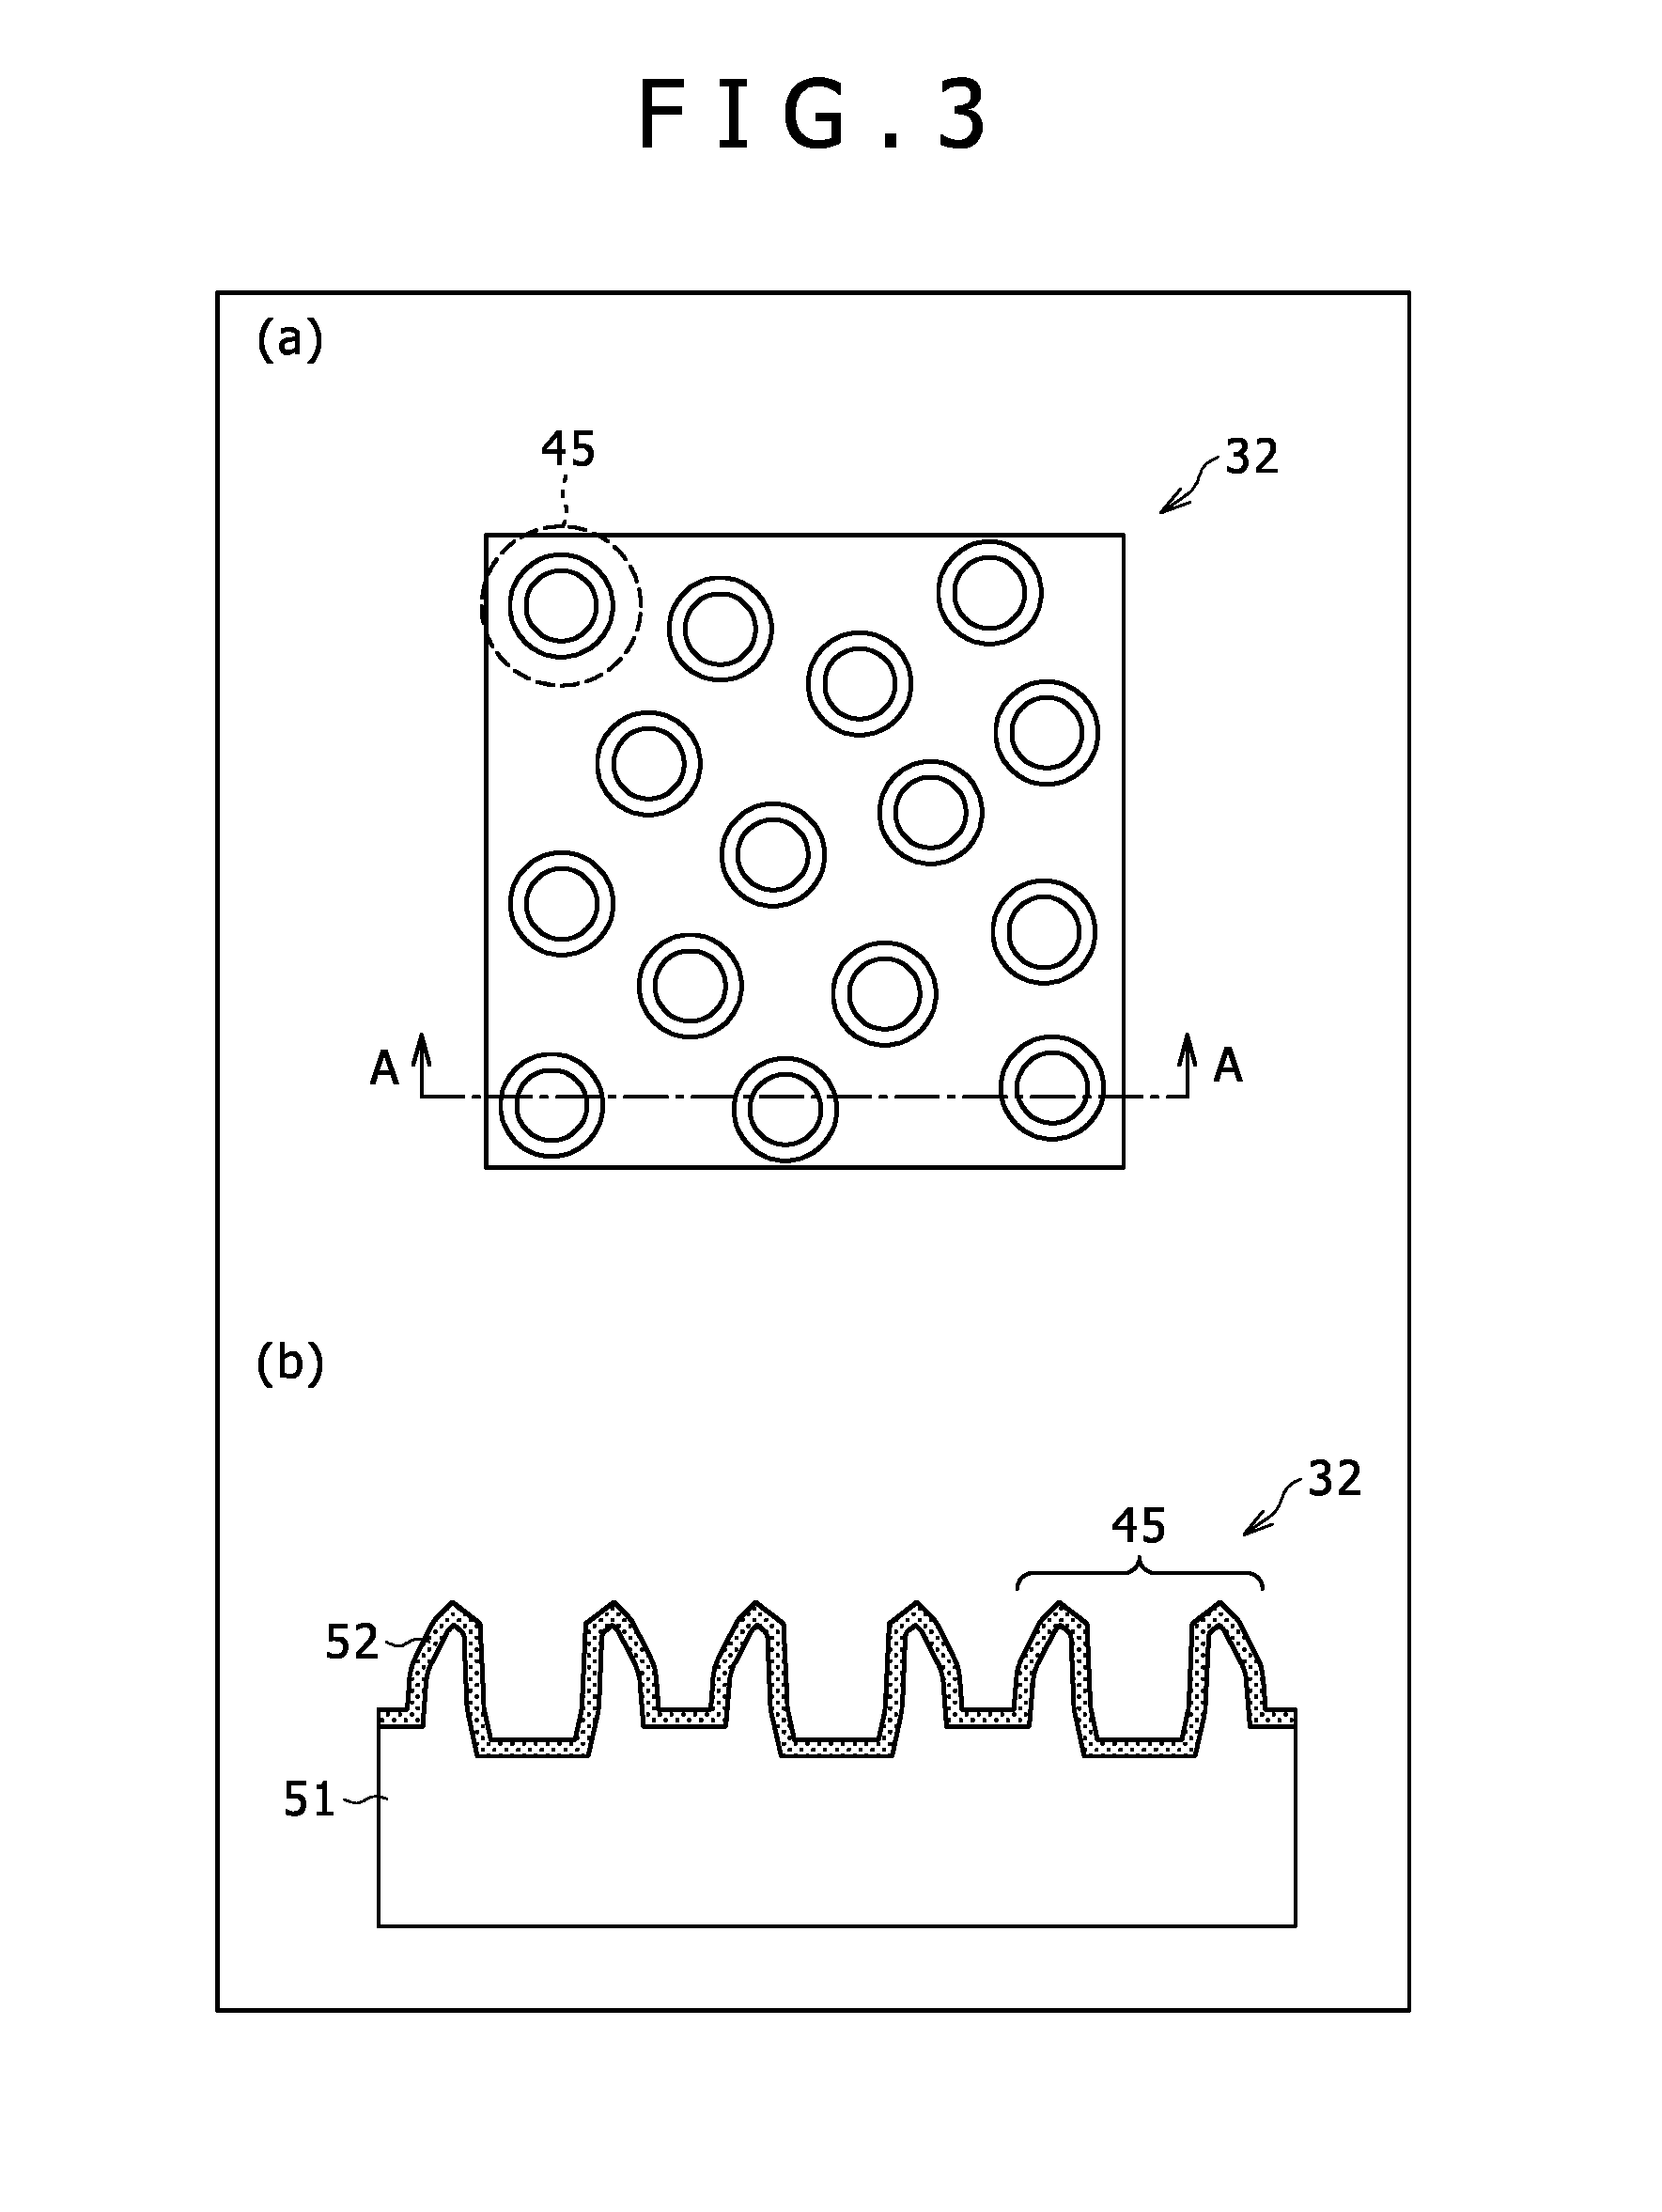 Structure, chip for localized surface plasmon resonance sensor, localized surface plasmon resonance sensor, and fabricating methods therefor